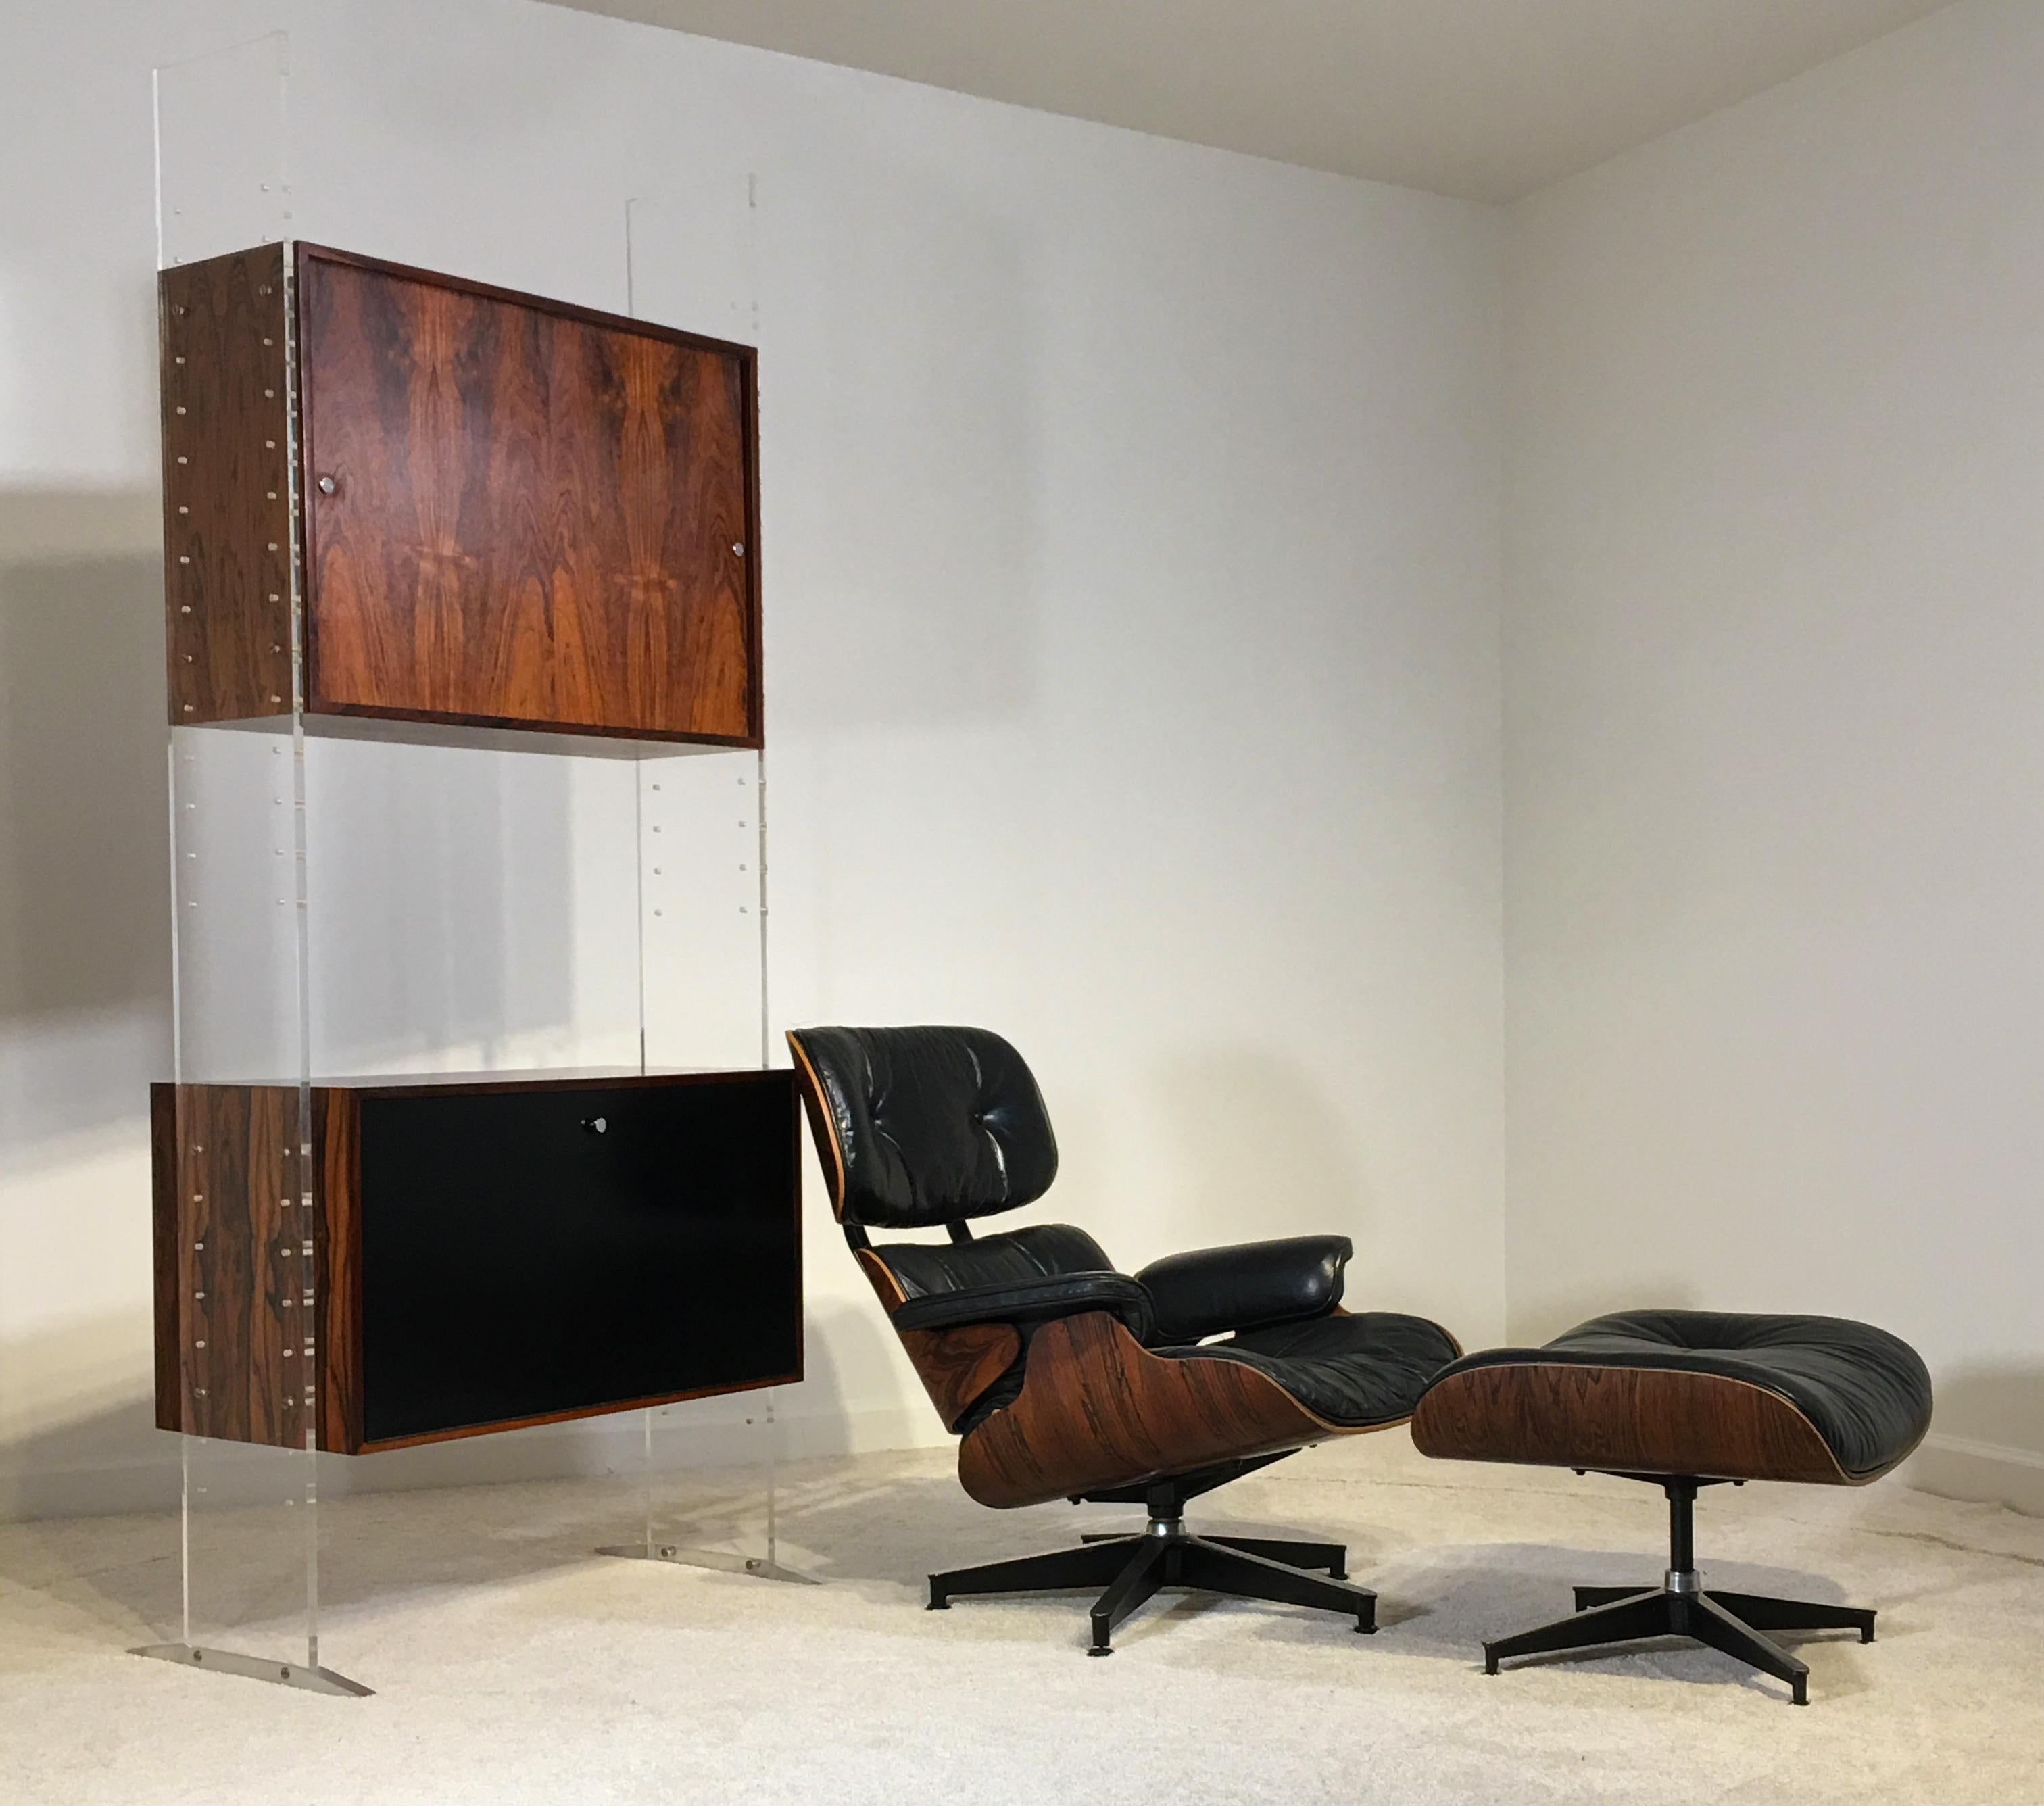 Poul Nørreklit, , Georg Petersens Møbelfabrik, Denmark,  circa 1969
Acrylic, steel, Brazilian Rosewood, lacquer,  Measures: 82.5 tall x 16 deep and 35 inches wide

A substantial and bold executive upright storage system with optional dividers